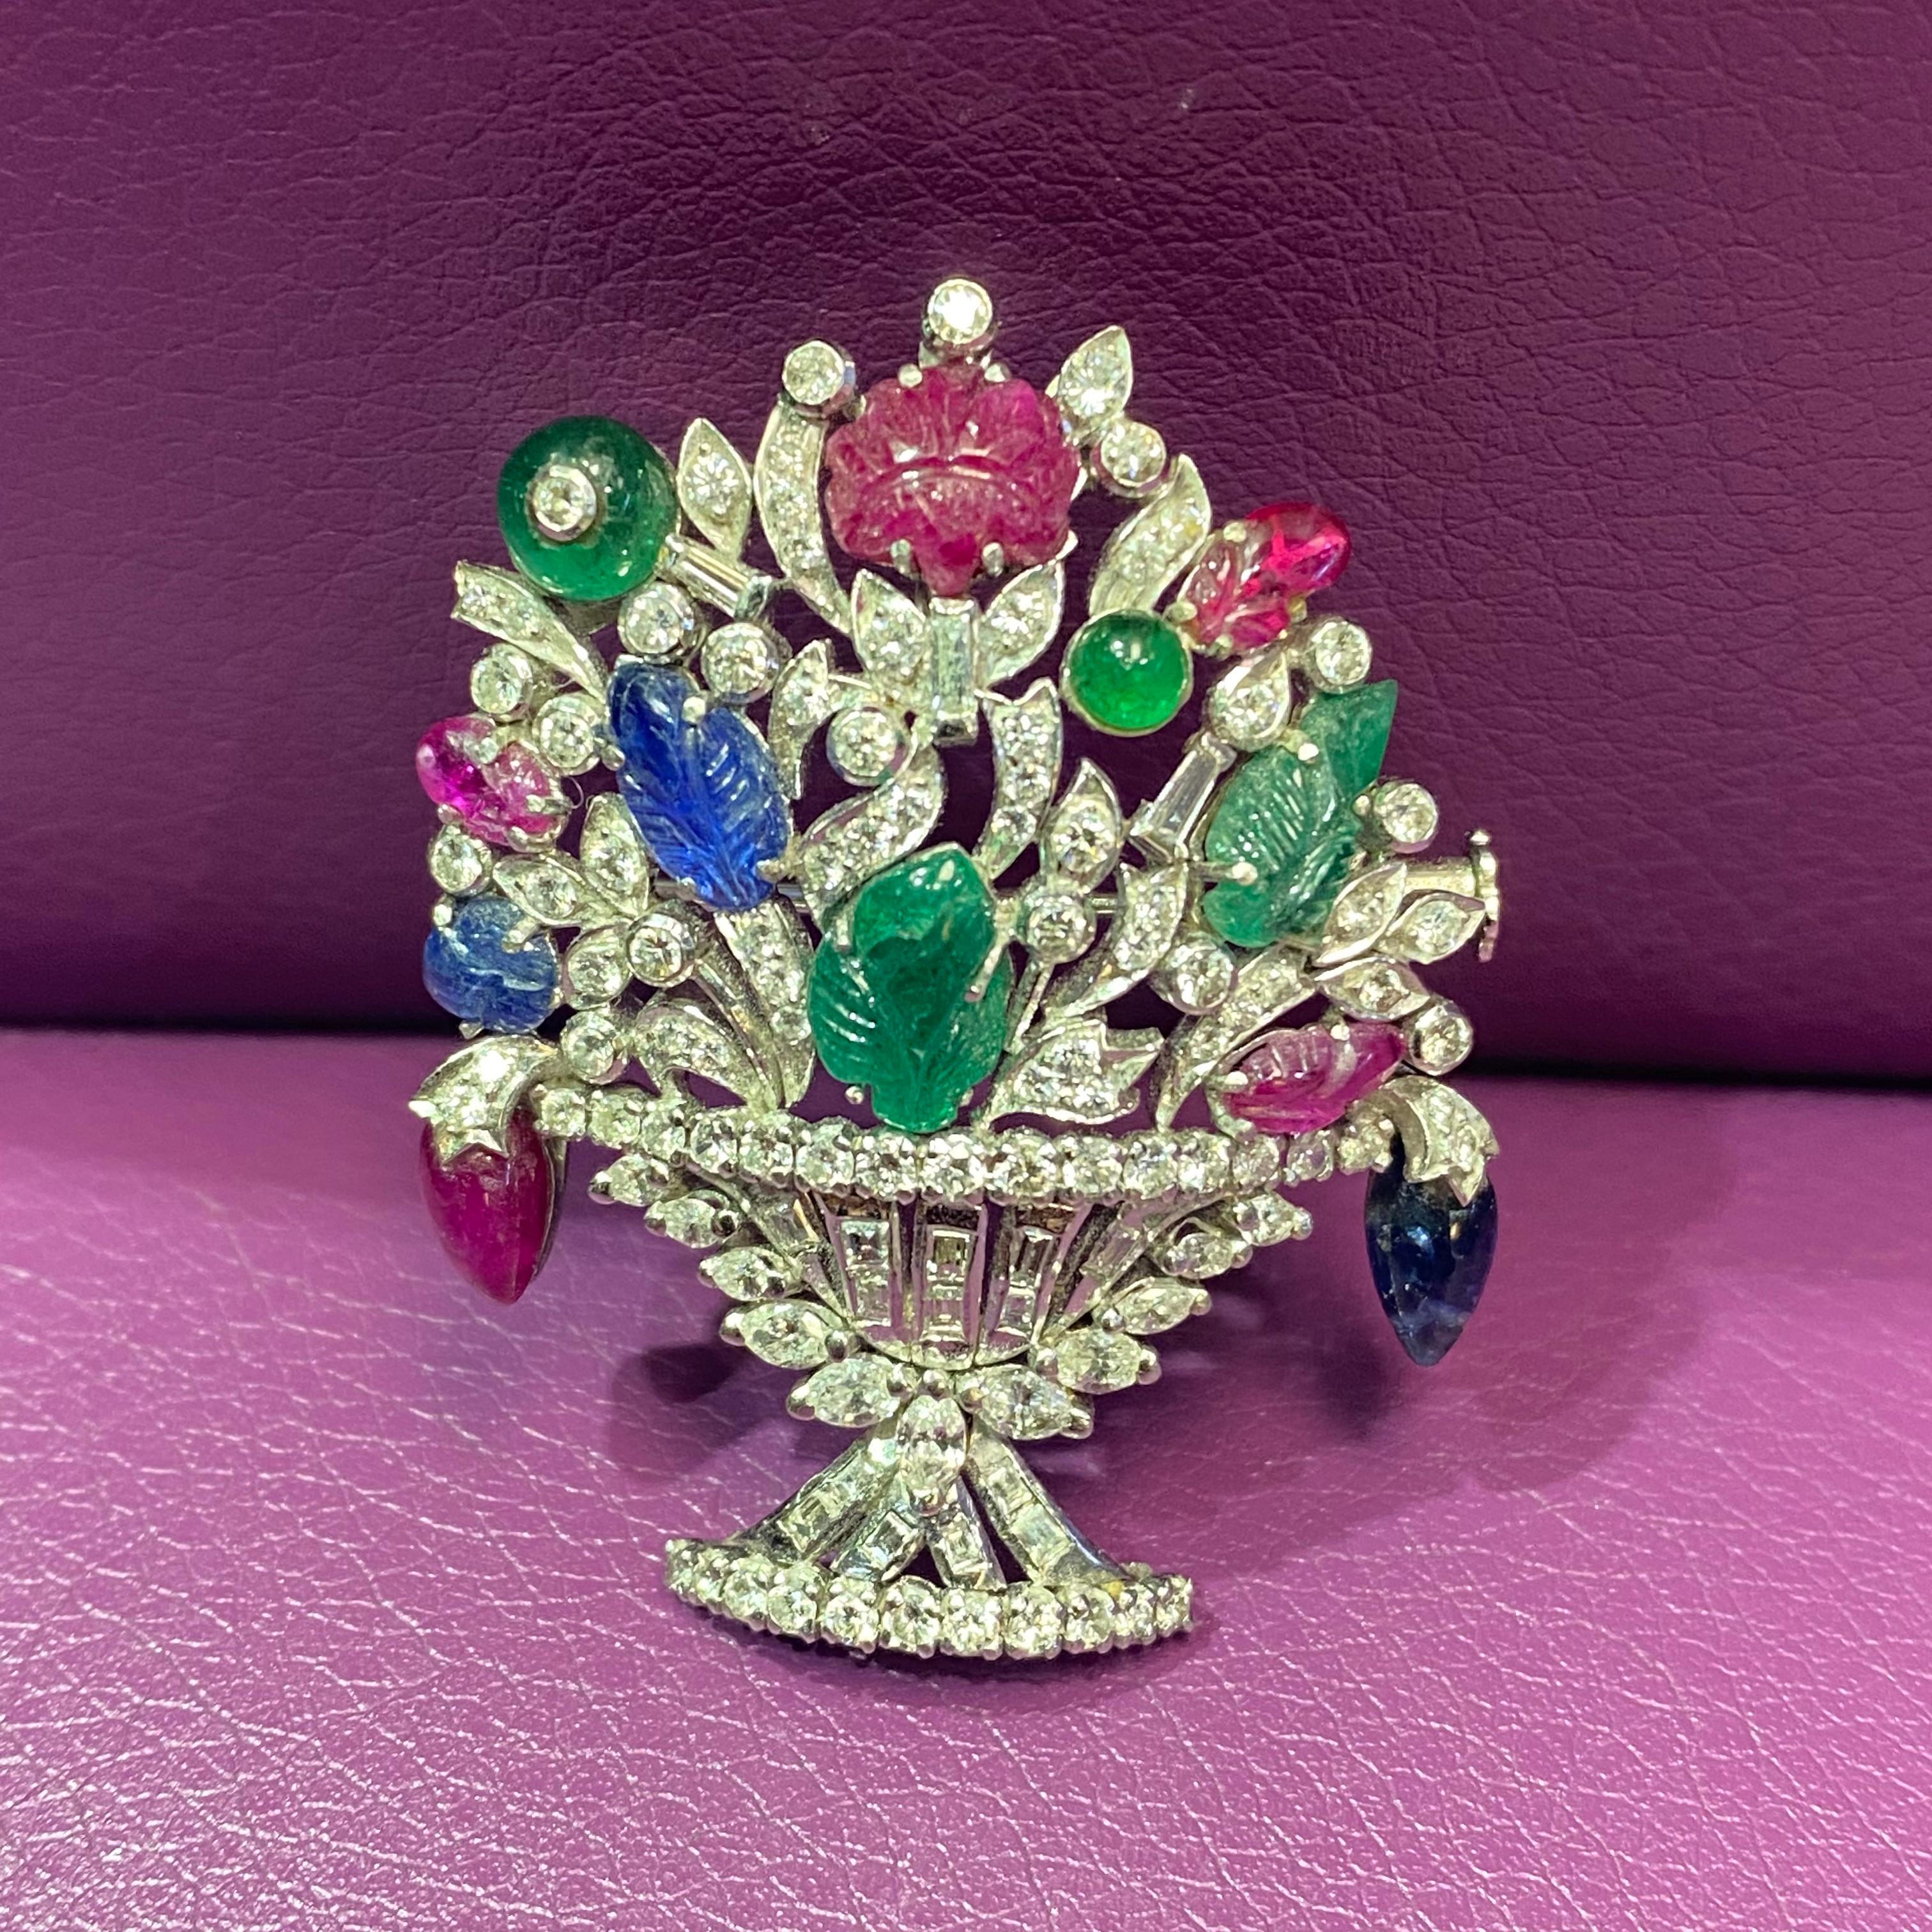 Tutti Frutti Diamond Giardinetto  Flower Basket Brooch 

A 18k white gold flower basket brooch including 2 carved & 2 round emeralds approximately 2.88 cts.  2 carved  & 1 pear shape sapphire approximately  2.18 cts.  4 carved rubies &  1 pear shape